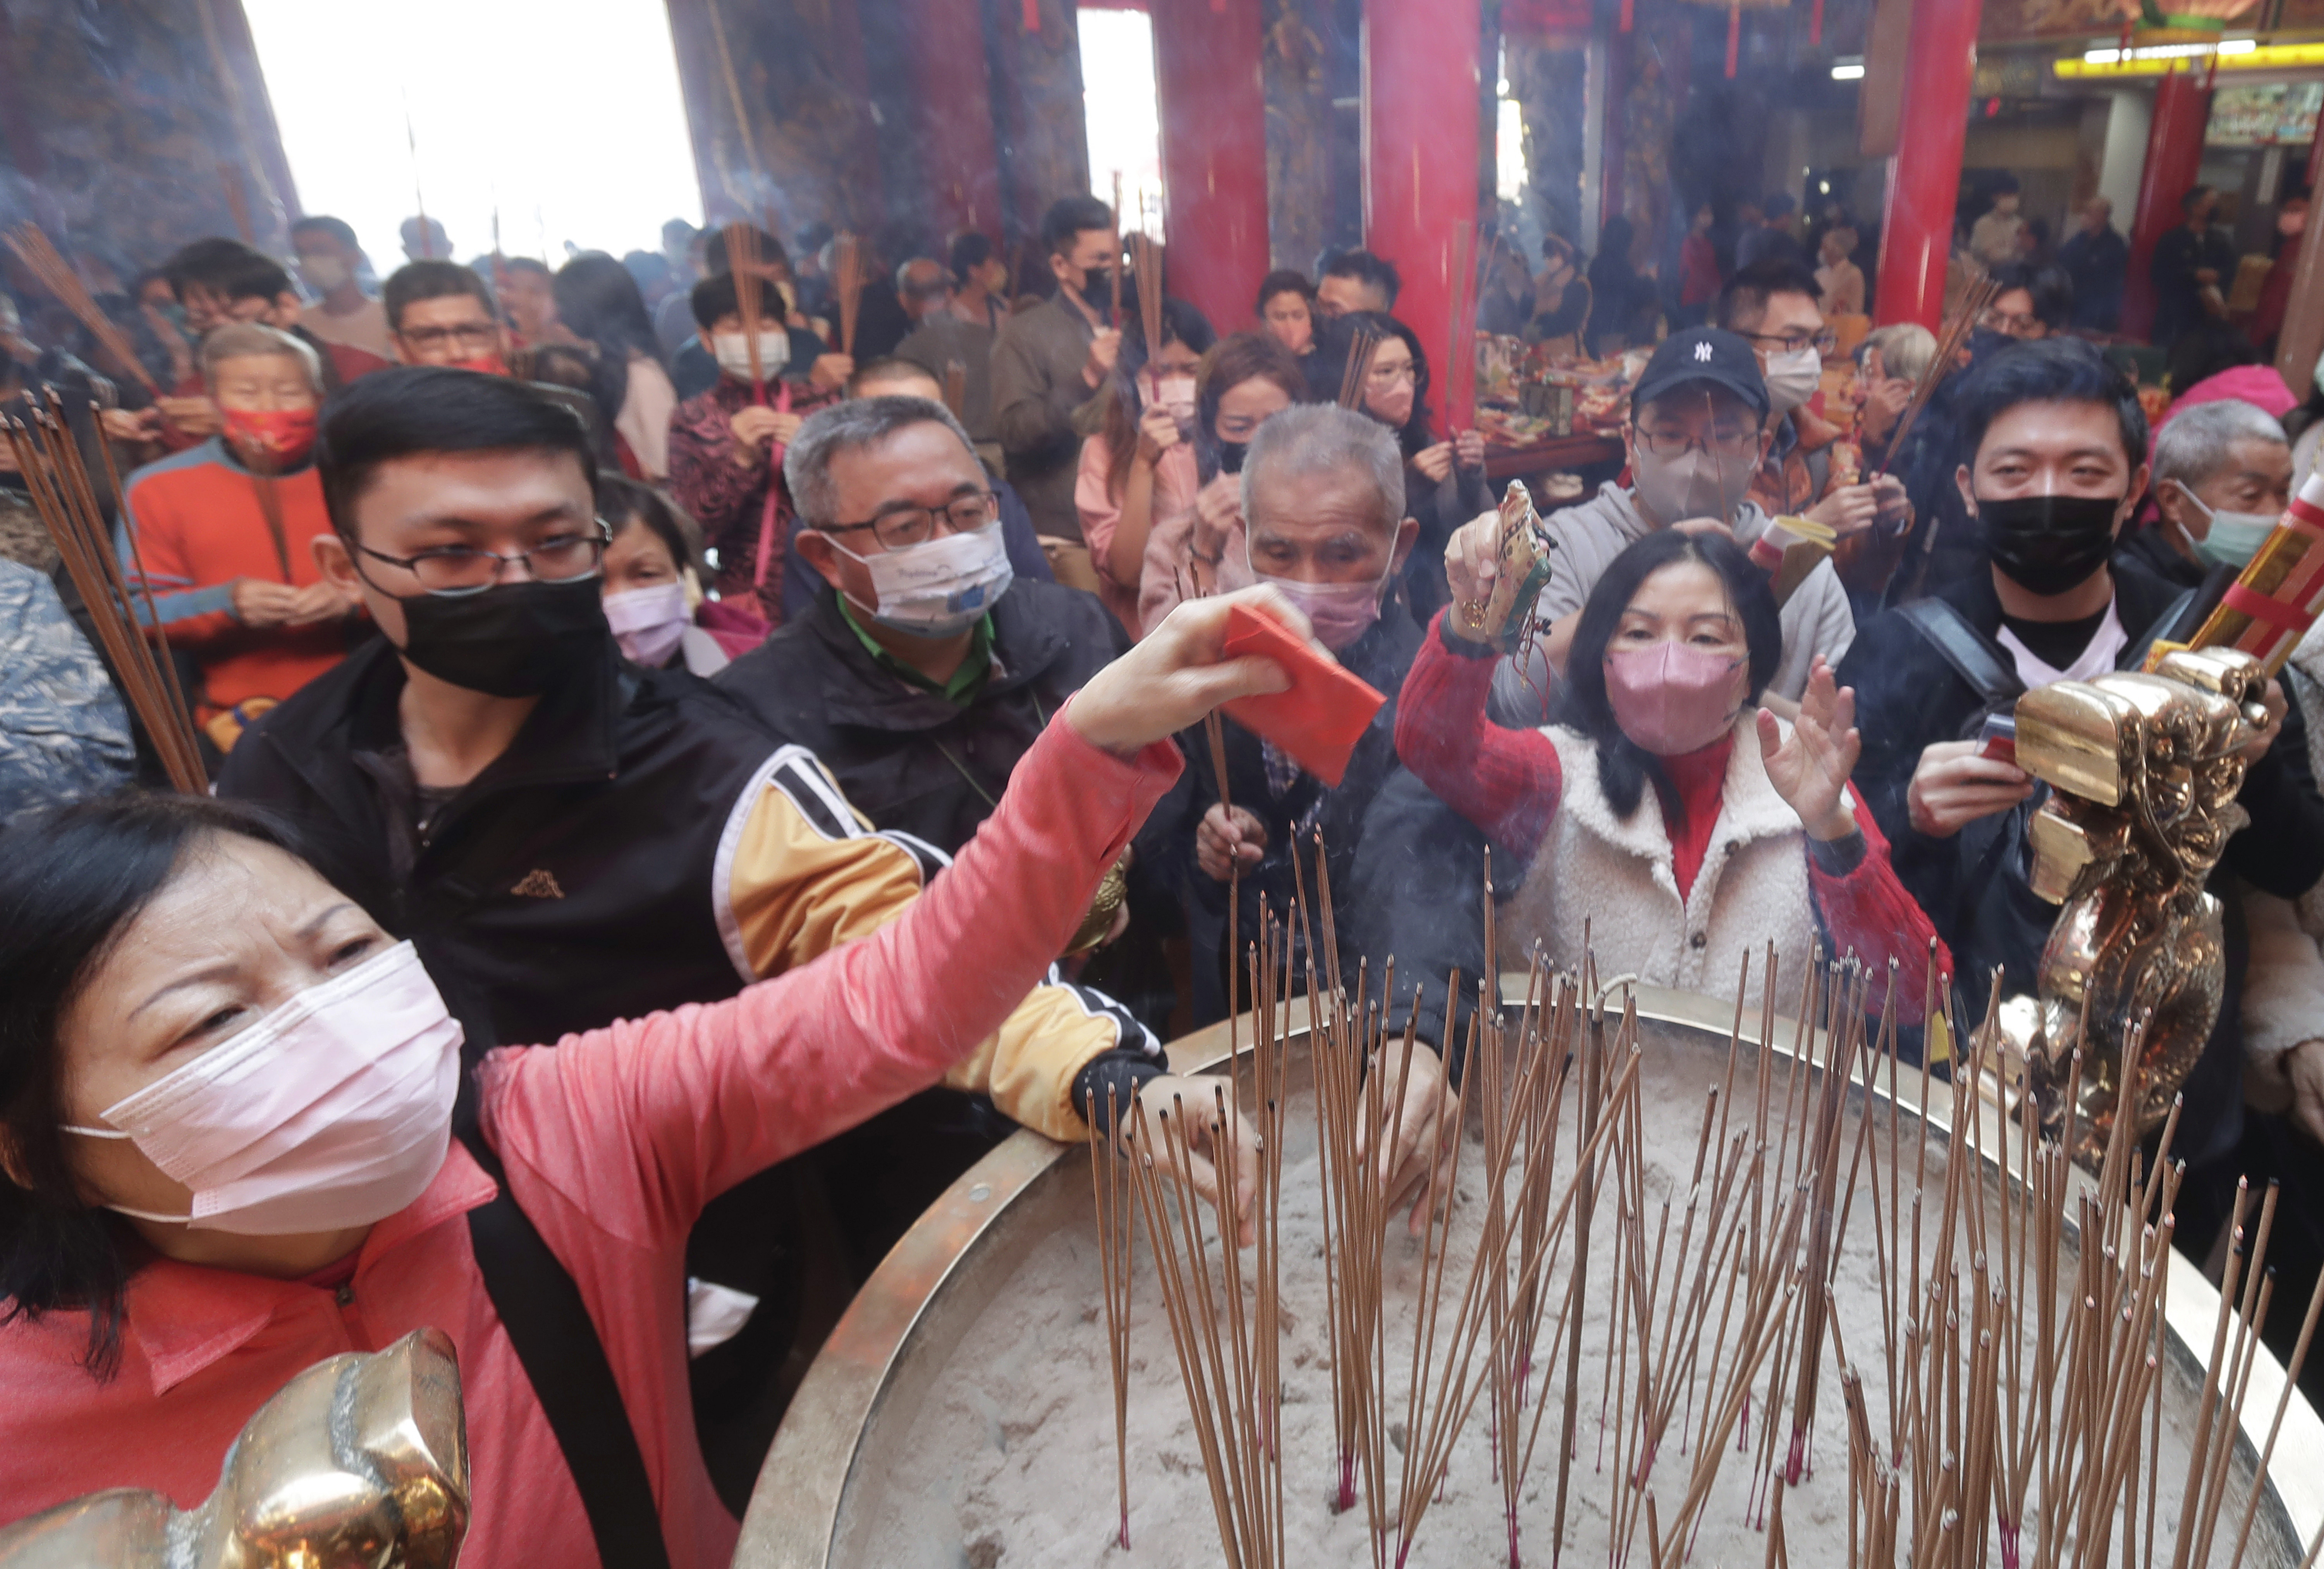 Worshipers wearing face masks to help combat the spread of the coronavirus pray for blessings at a temple on the first day of the Lunar New Year in Taipei, Taiwan, Sunday, Jan. 22, 2023. Each year is named after one of the 12 signs of the Chinese zodiac in a repeating cycle, and the one that begins is the Year of the Rabbit.  (AP Photo/Chiang Ying-ying)